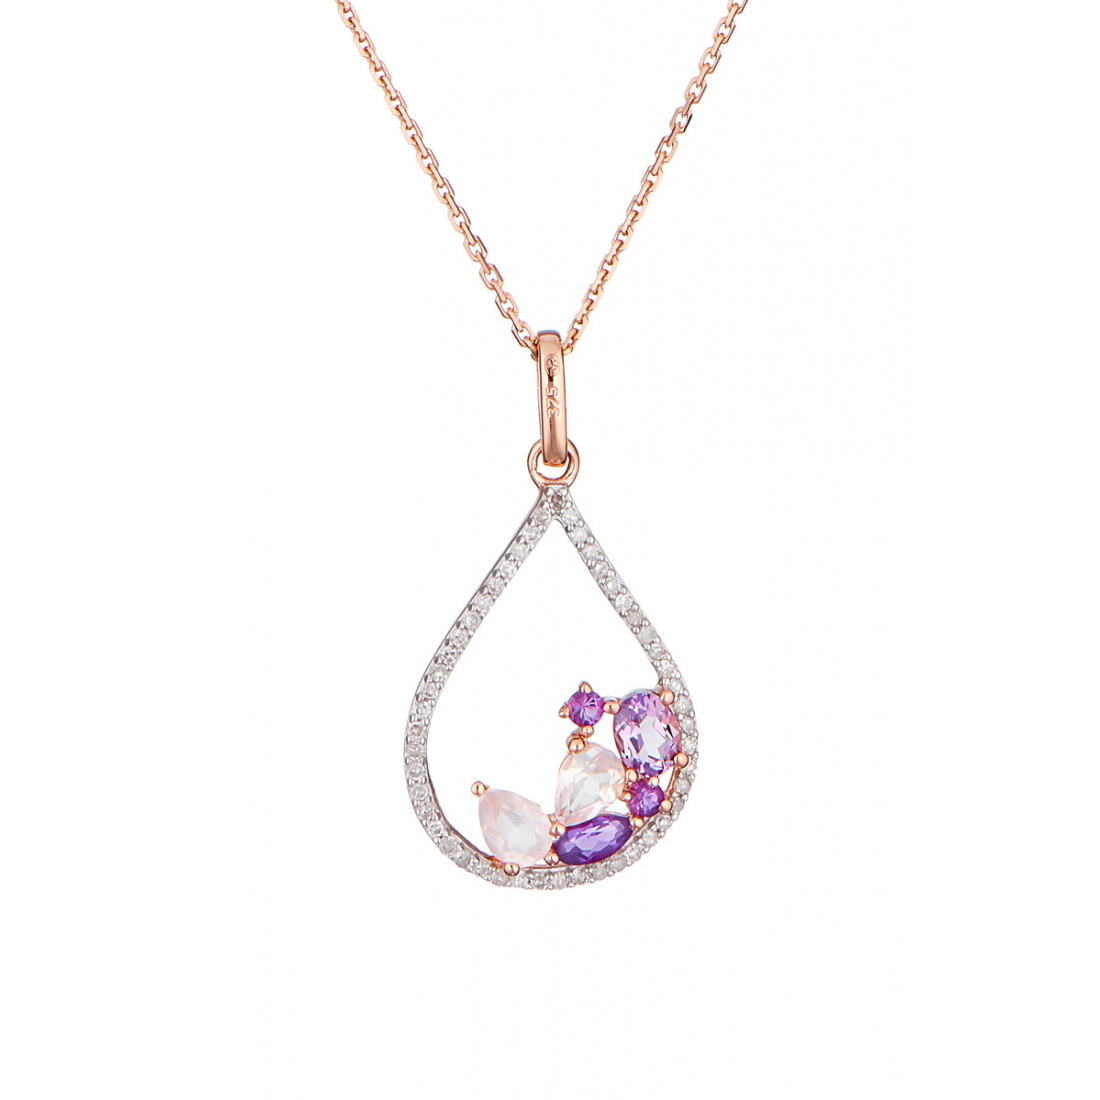 Women's 'Lilas' Pendant with chain